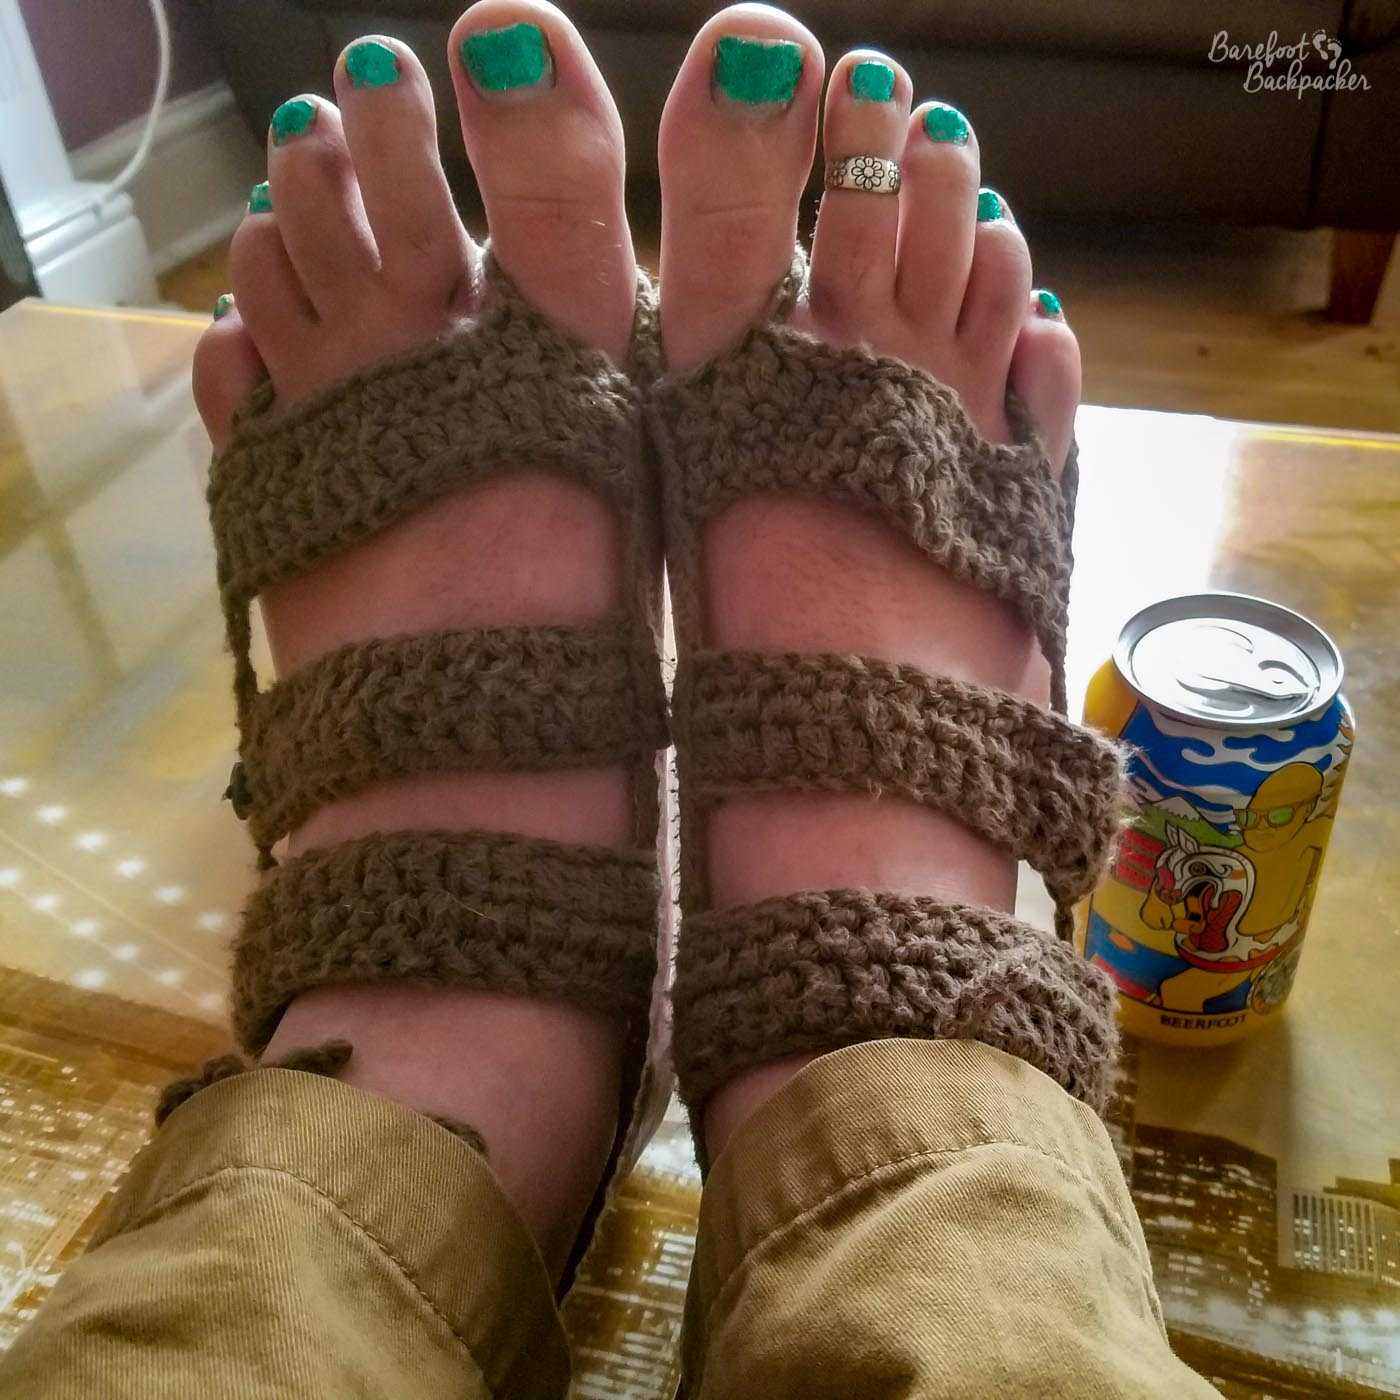 The new barefoot sandals. Three thick brown crocheted straps across the width of the top of each foot, from the toes to the ankle. Loops of thread go round both the big toes and the little toes. Toenails are green and sparkly, the feet are resting on a glass table, and to the right of the right foot is a can of beer called 'Beerfoot'.